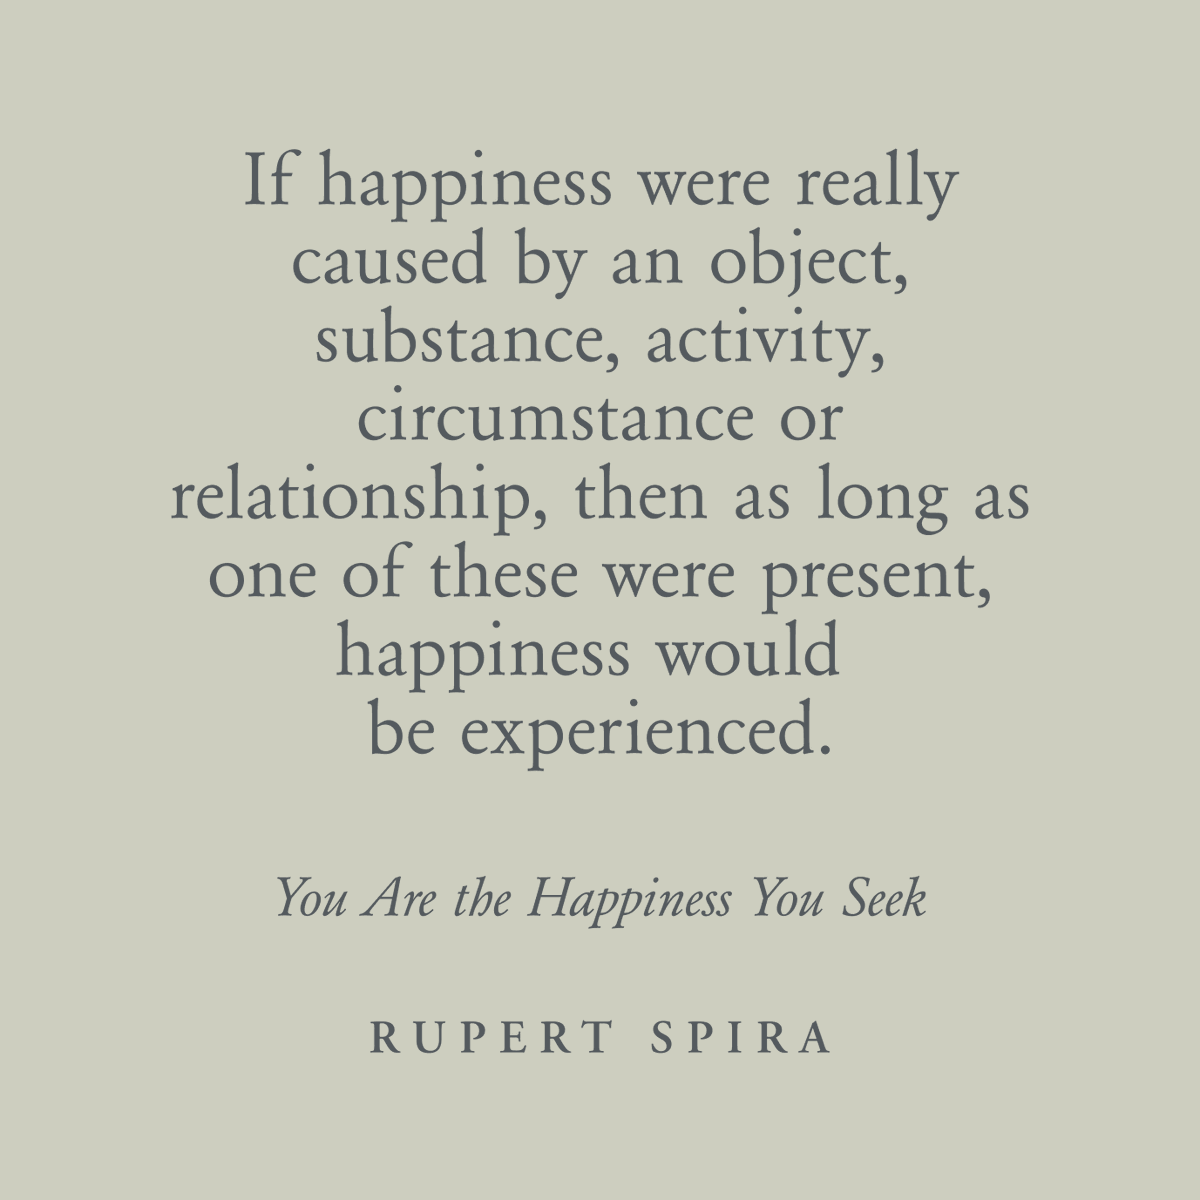 If happiness were really caused by an object, substance, activity, circumstance or relationship, then as long as one of these were present, happiness would be experienced. – Rupert Spira, You Are The Happiness You Seek Continue reading here: rupertspira.com/store